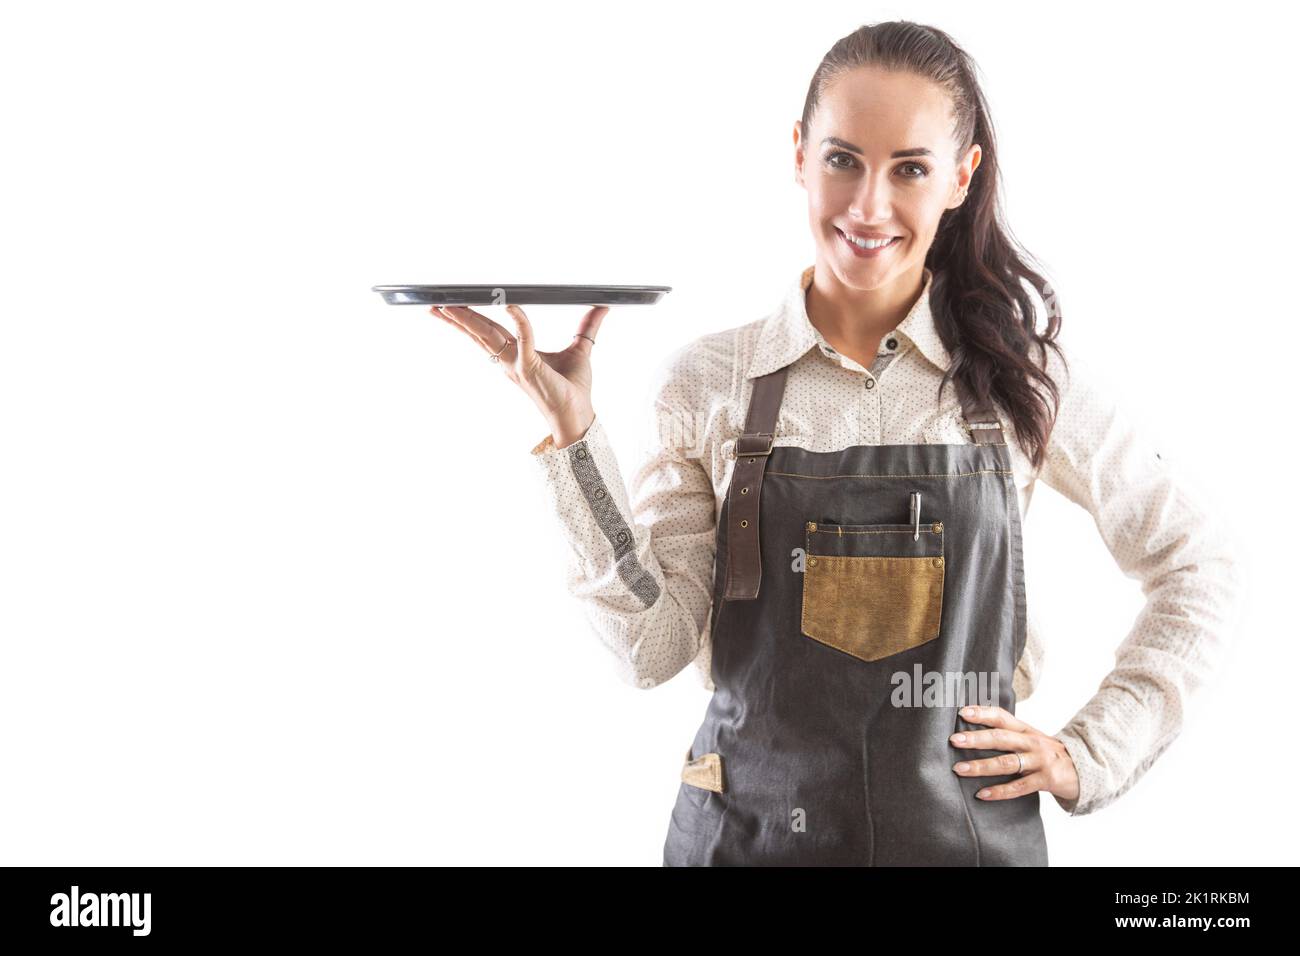 Waitress holding a tray in her hand is dressed in apron posing on an isolated background. Stock Photo